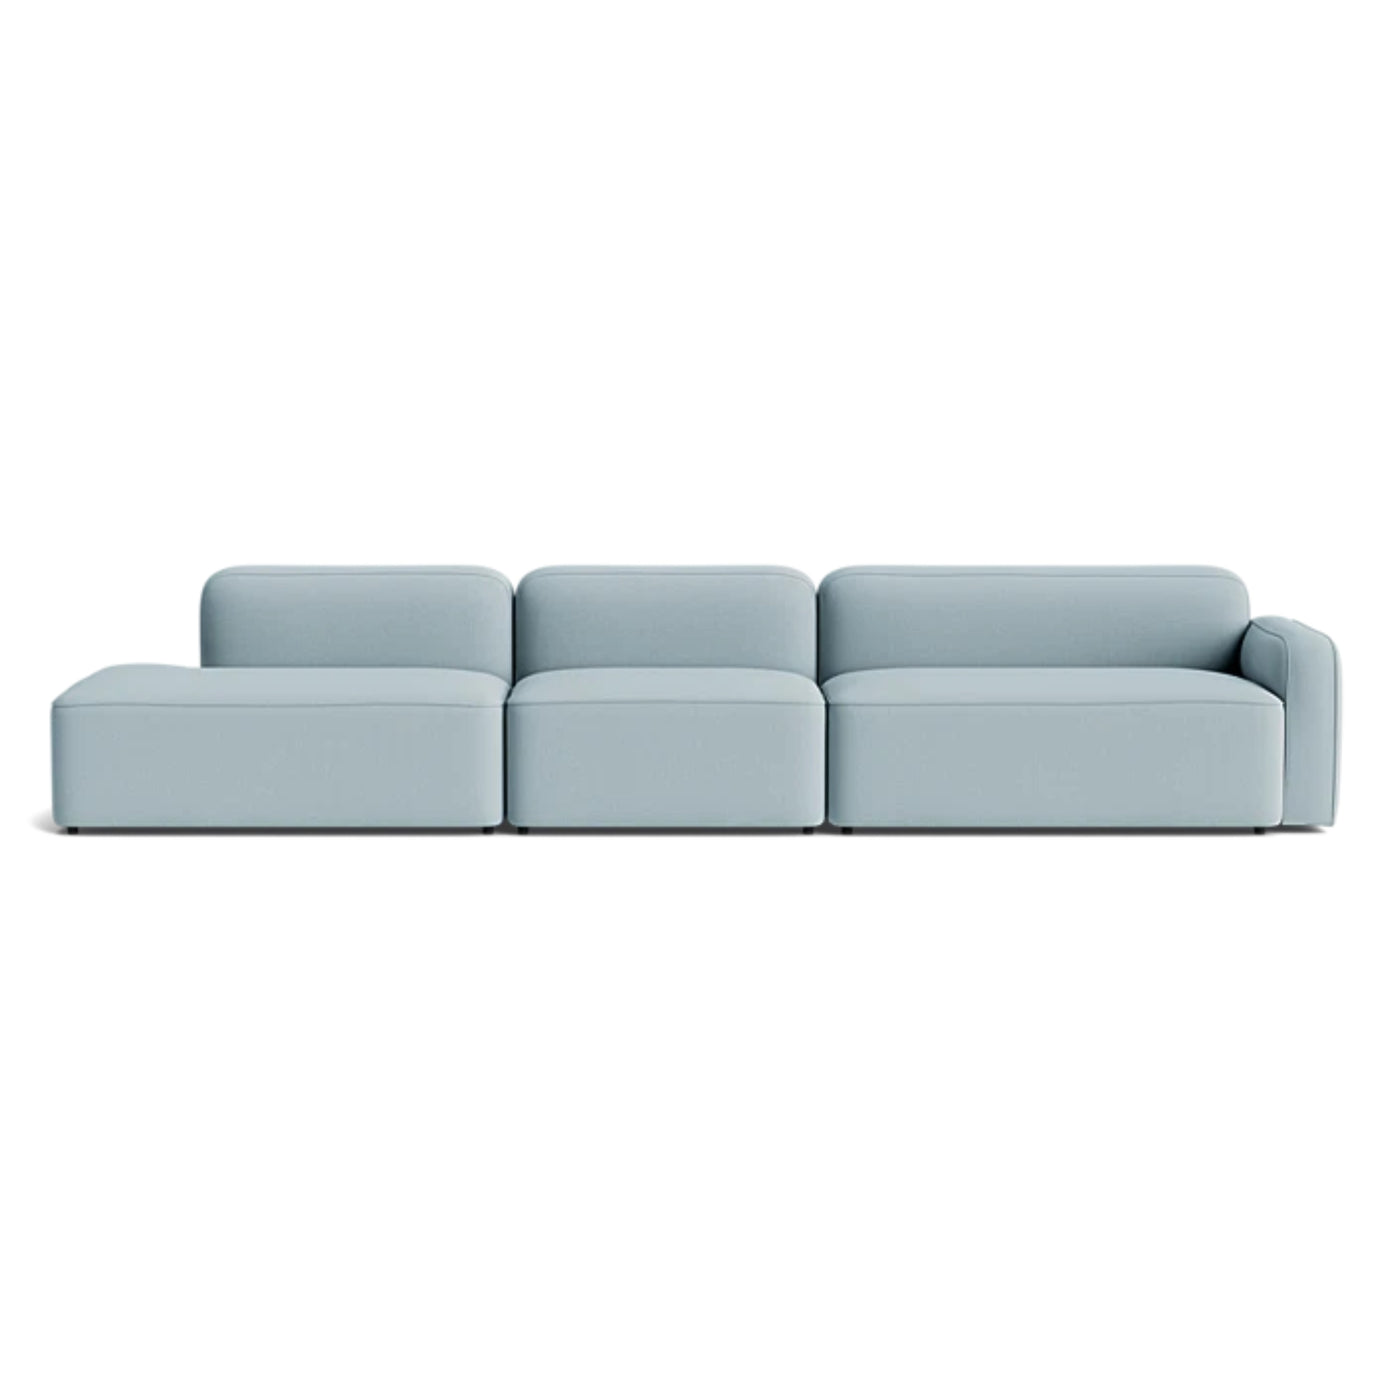 Normann Copenhagen Rope 3 Seater Modular Sofa. Made to order at someday designs. #colour_steelcut-trio-713